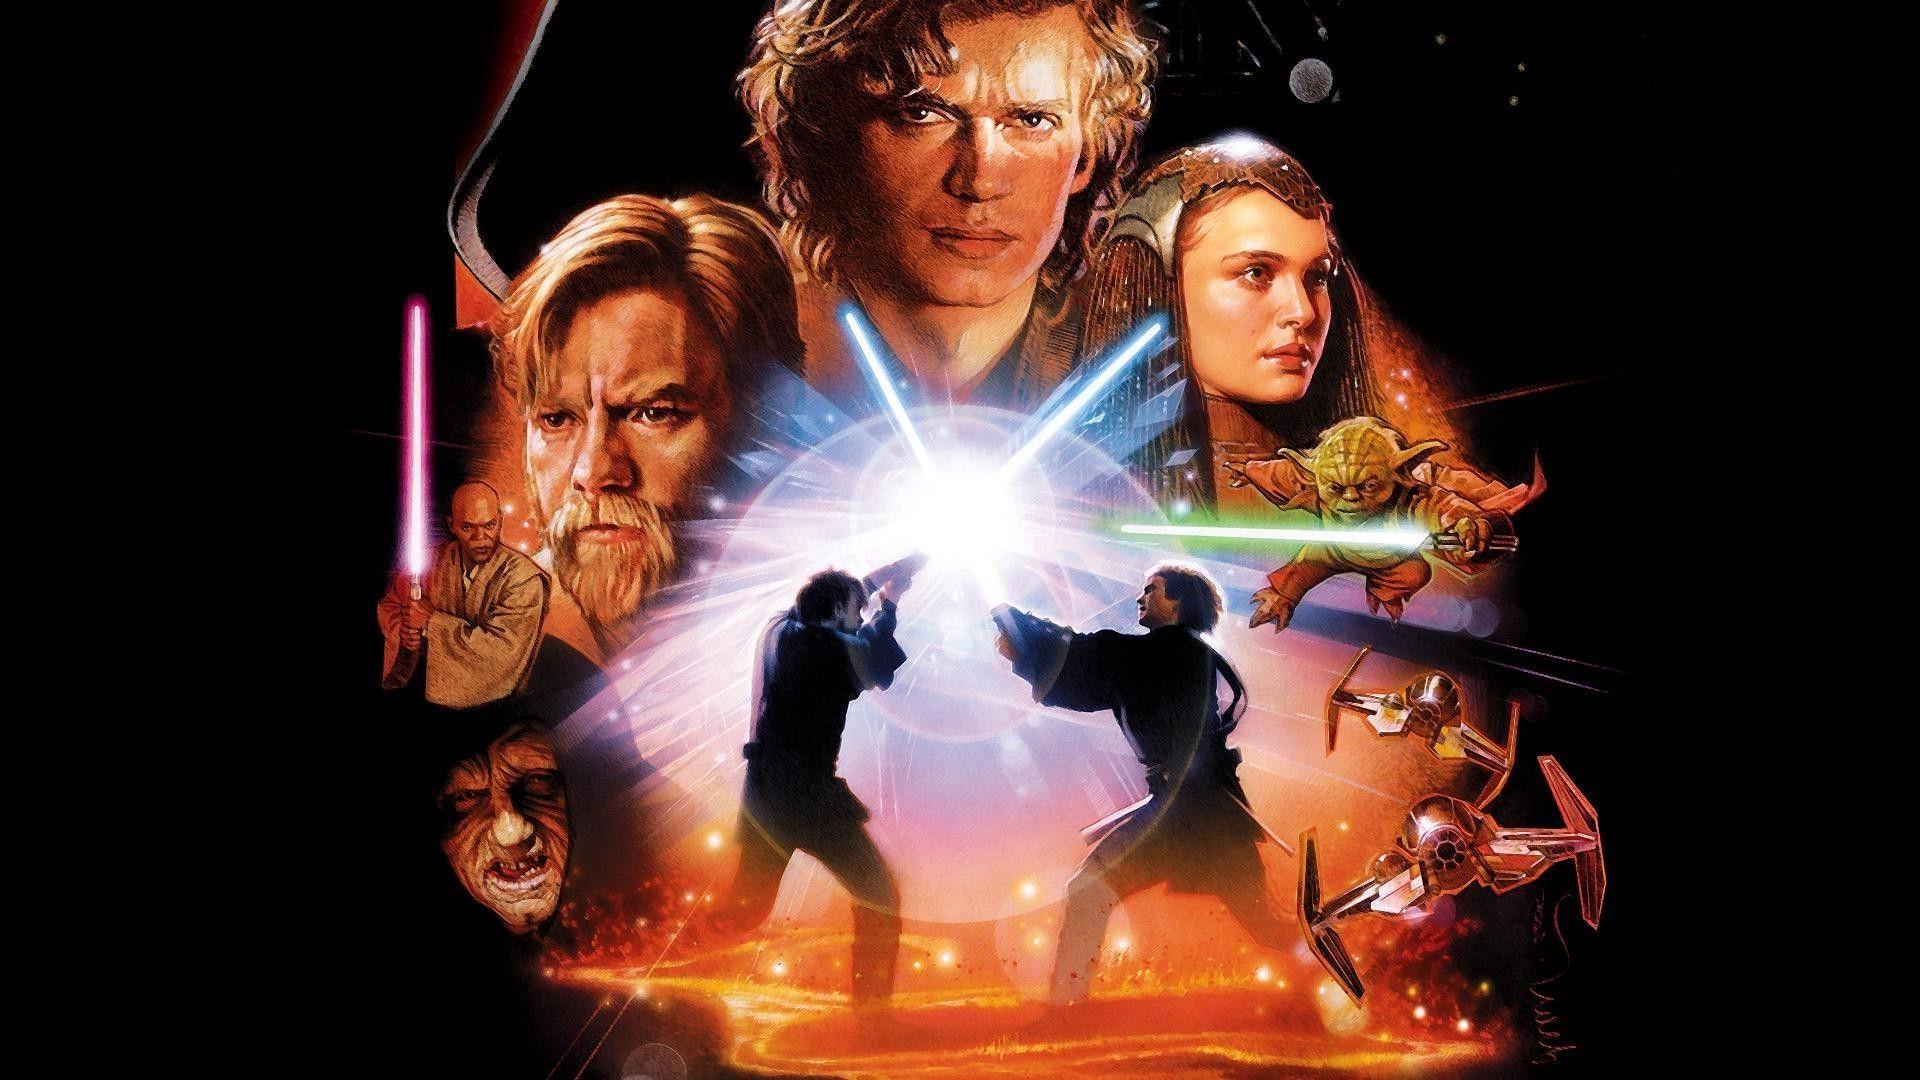 movies, Star Wars, Star Wars: Episode III The Revenge Of The Sith